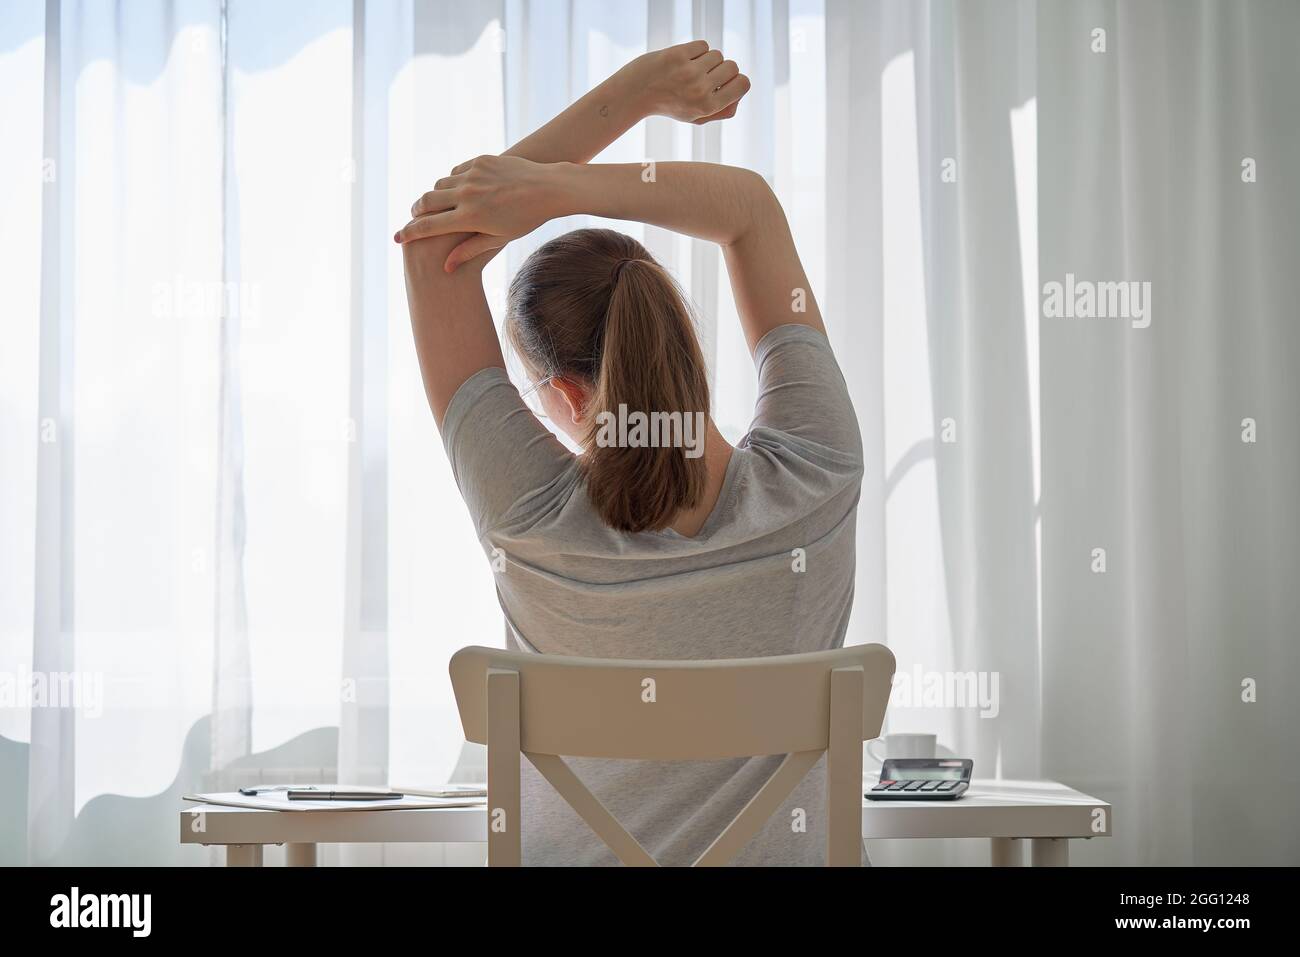 Faceless young female working from home and feeling discomfort in back. Remote work challenges Stock Photo